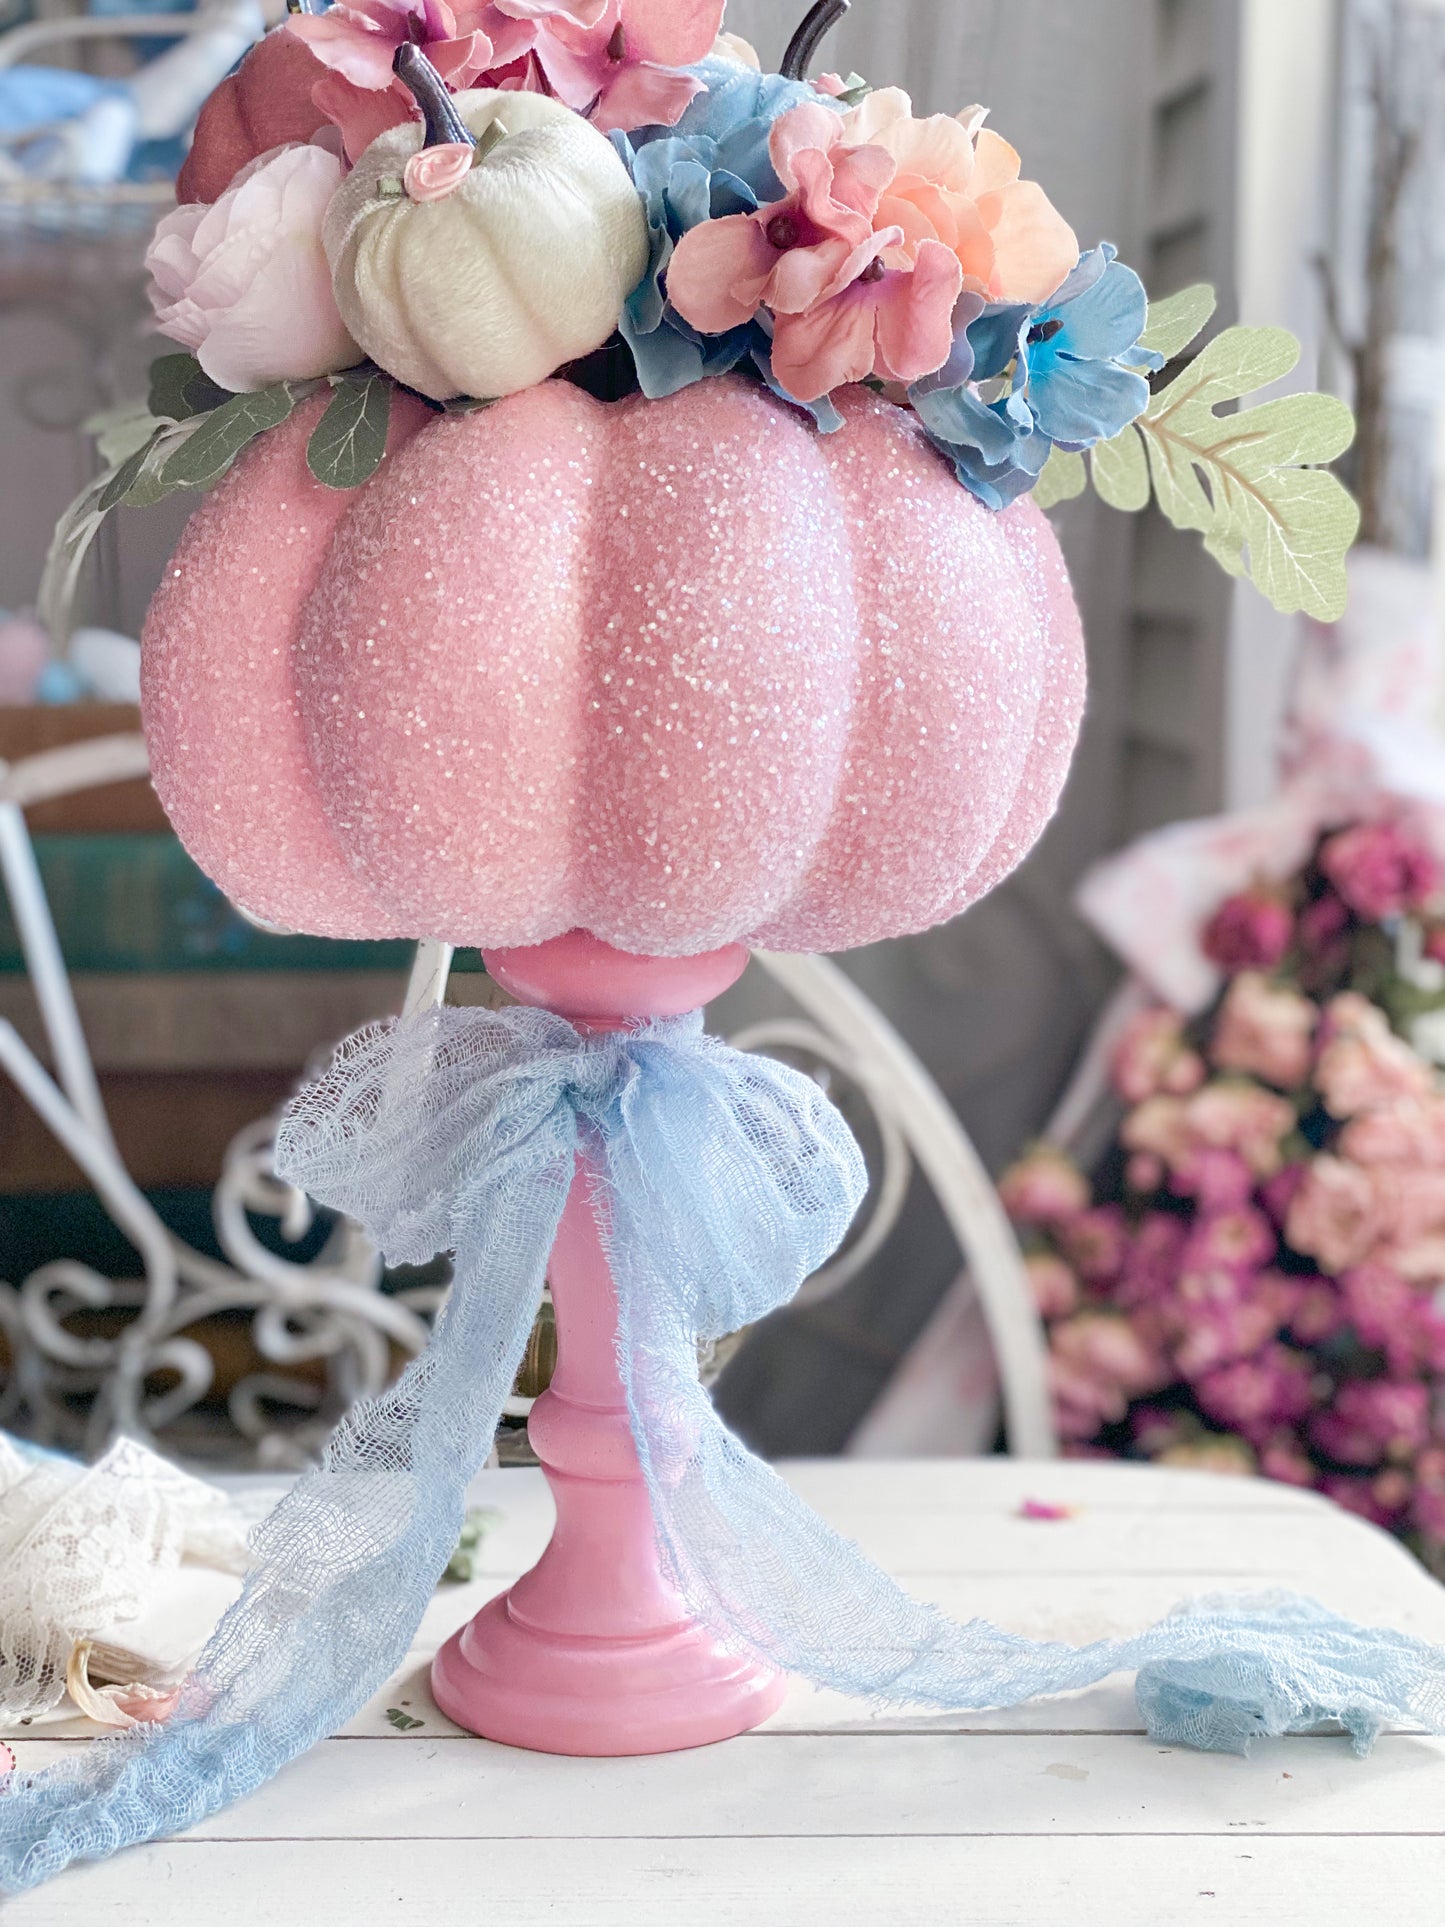 Bespoke Upcycled Pastel Pink Glam Glitter Pumpkin Topiary with Arrangement